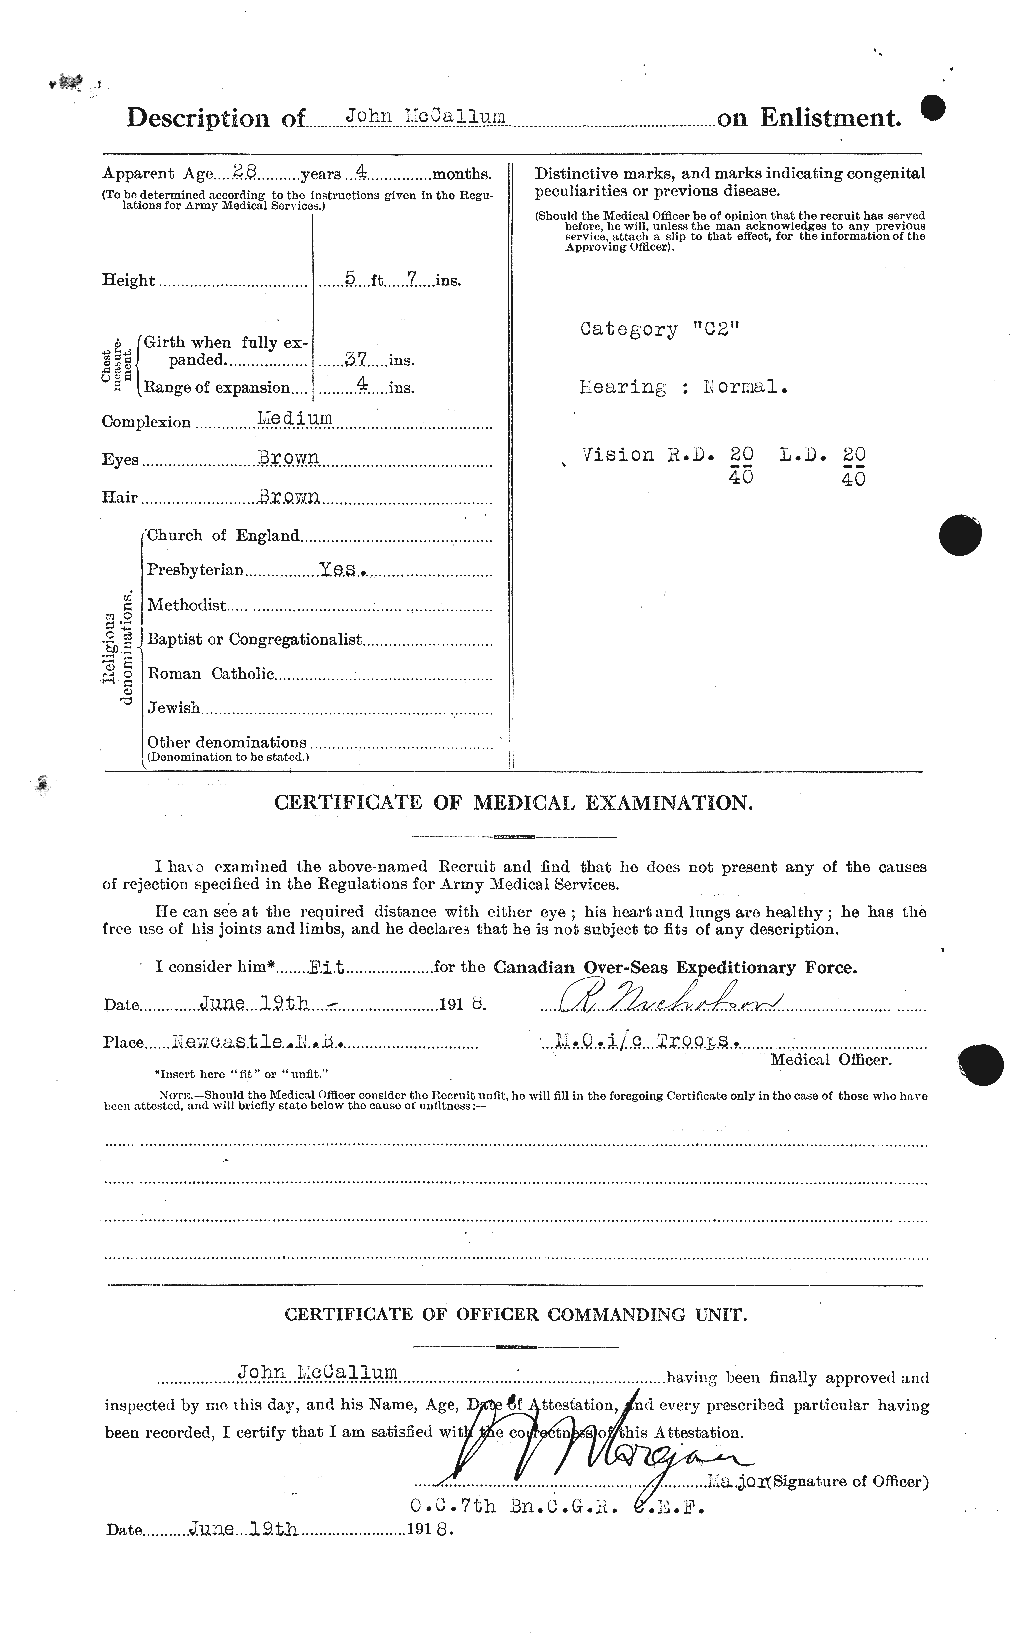 Personnel Records of the First World War - CEF 131532b